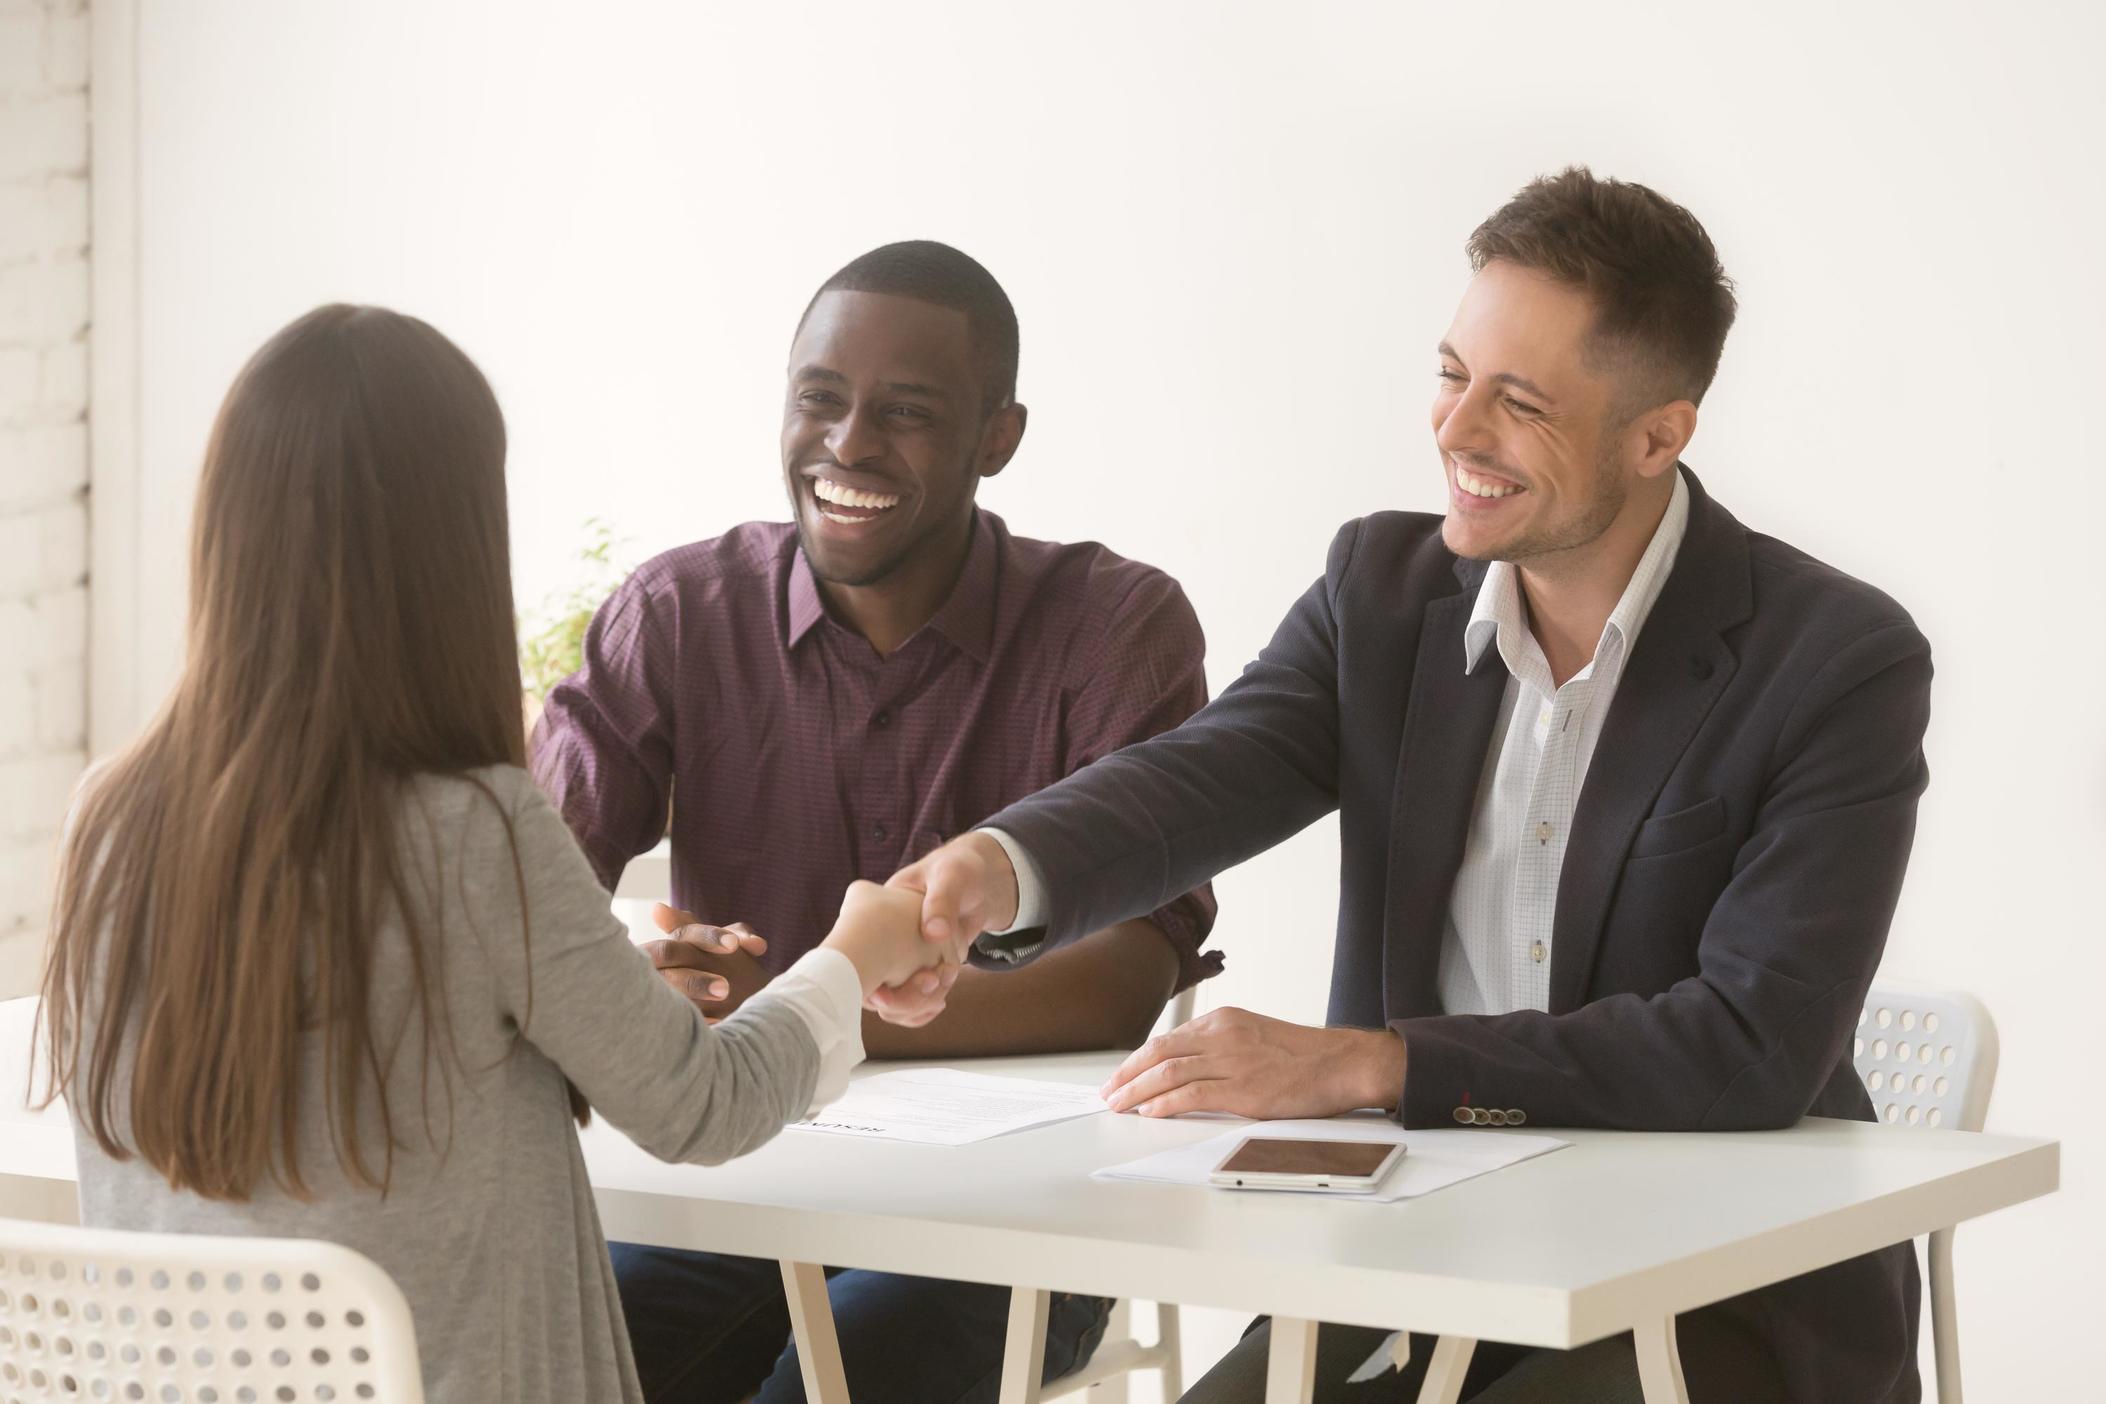 Business woman shaking hand of man across table